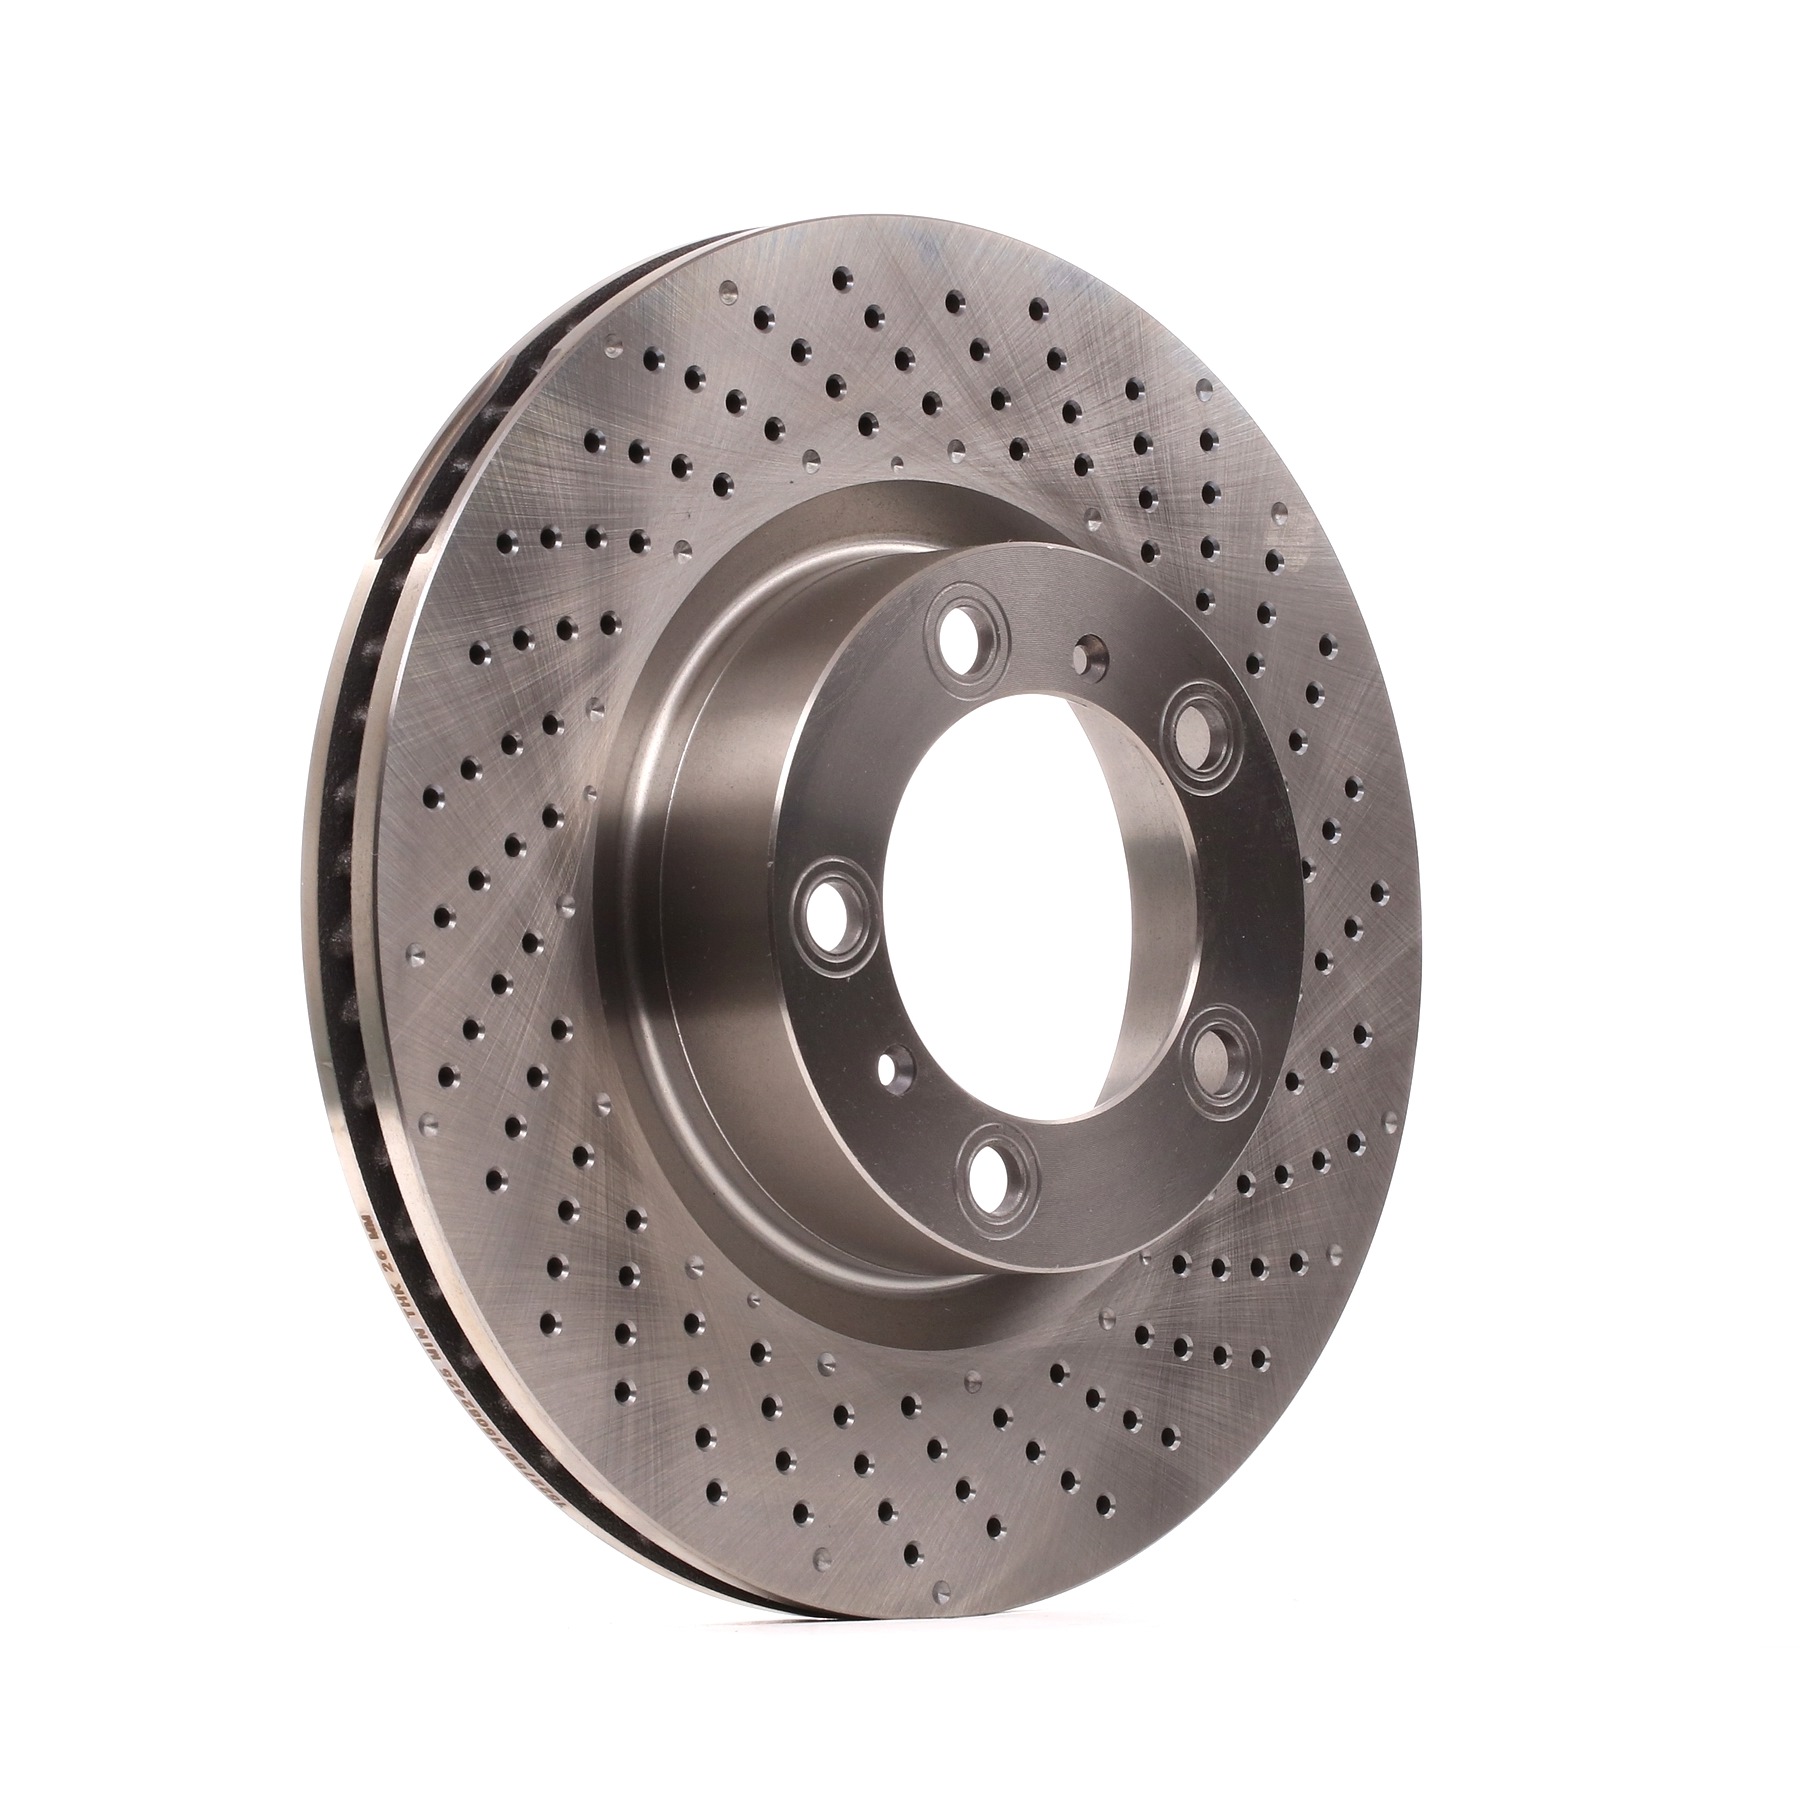 RIDEX 82B2575 Brake disc 330x28mm, 05/07x130, perforated/vented, Drilled dimples